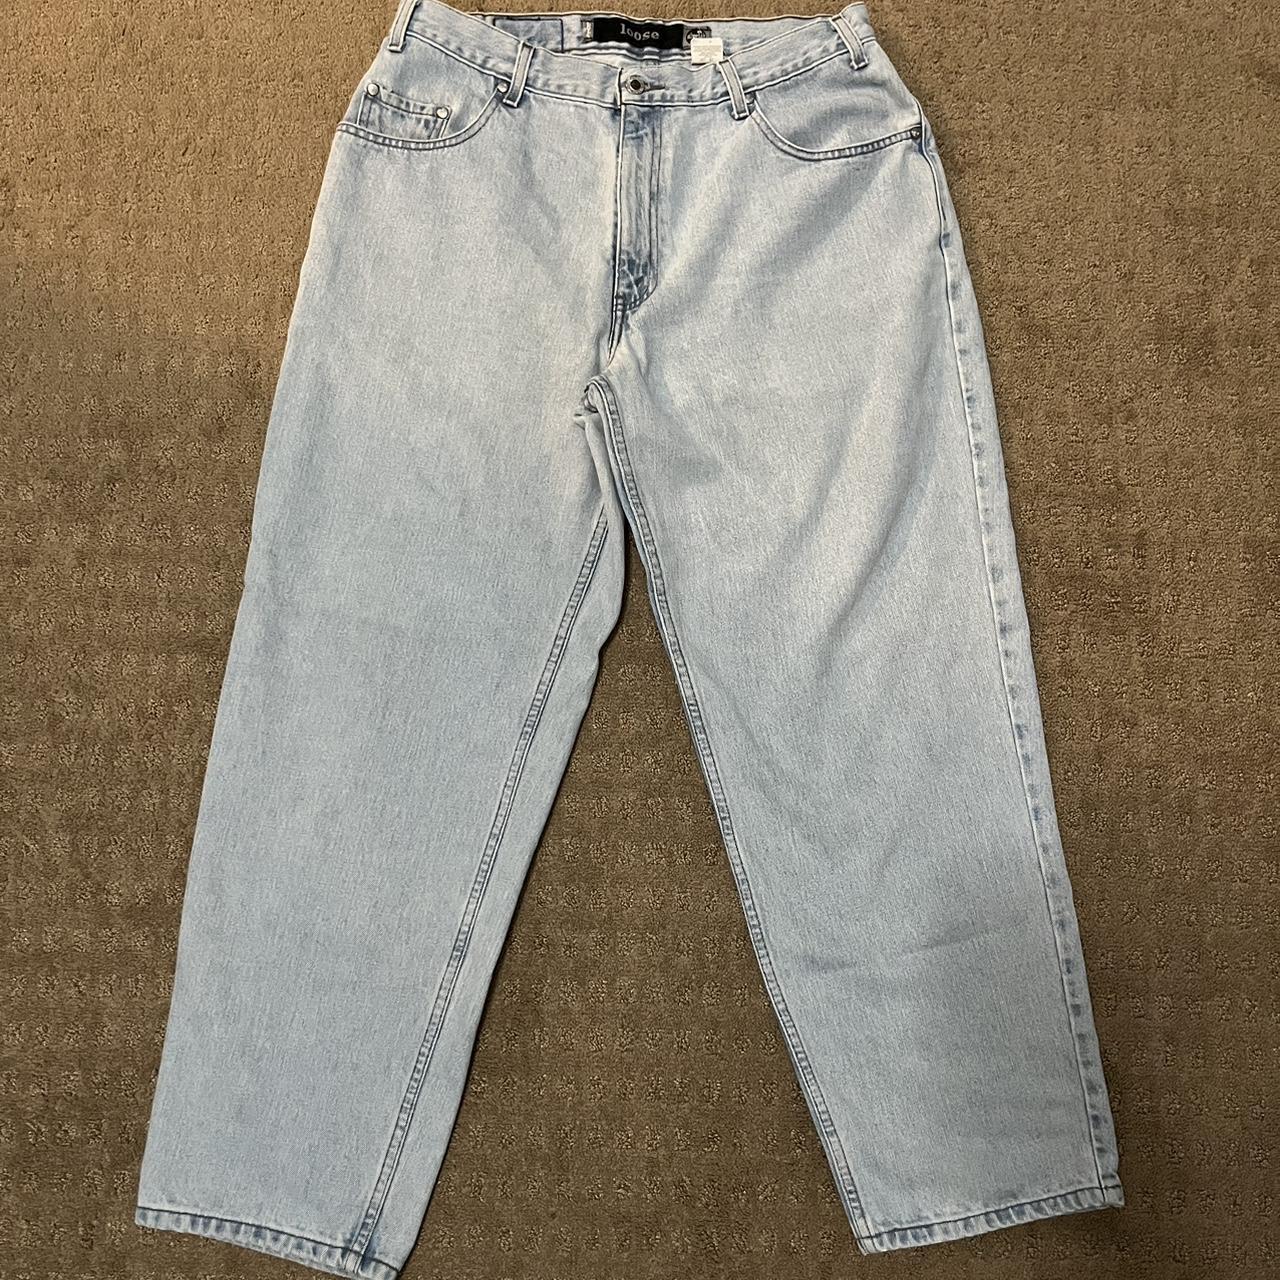 Perfect light silvertab jeans. Don’t know why the... - Depop